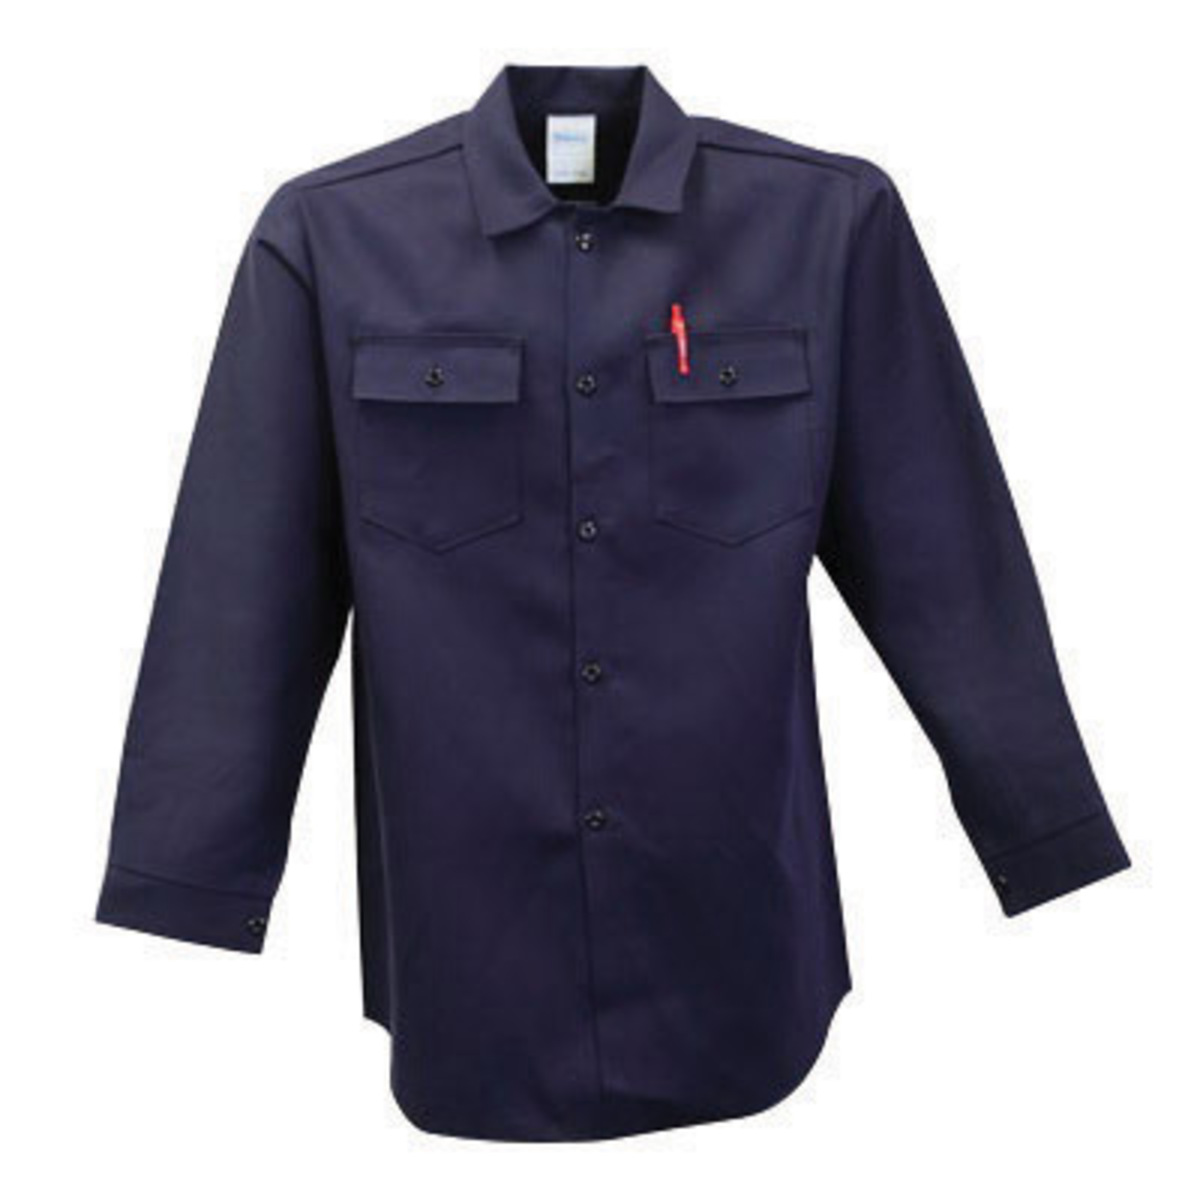 Stanco Safety Products™ Size 2X Navy Blue Indura® Arc Rated Flame Resistant Work Shirt With Button Closure